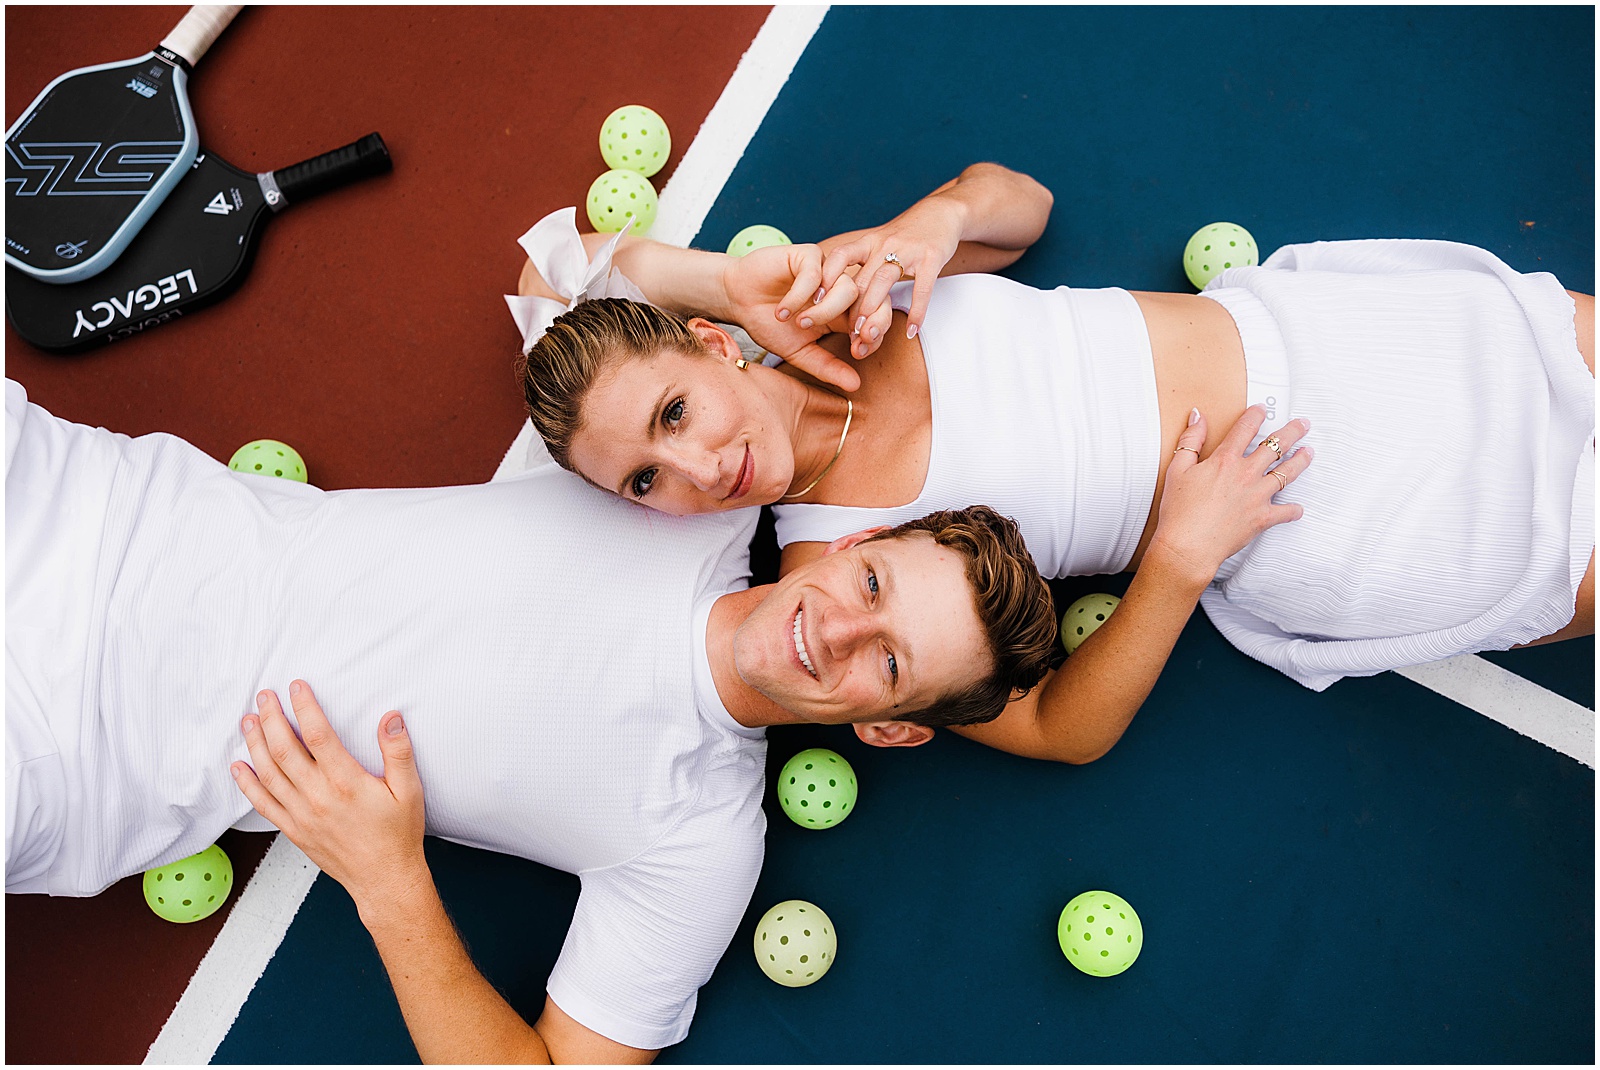 A couple lays on a pickleball court for fun engagement photos.